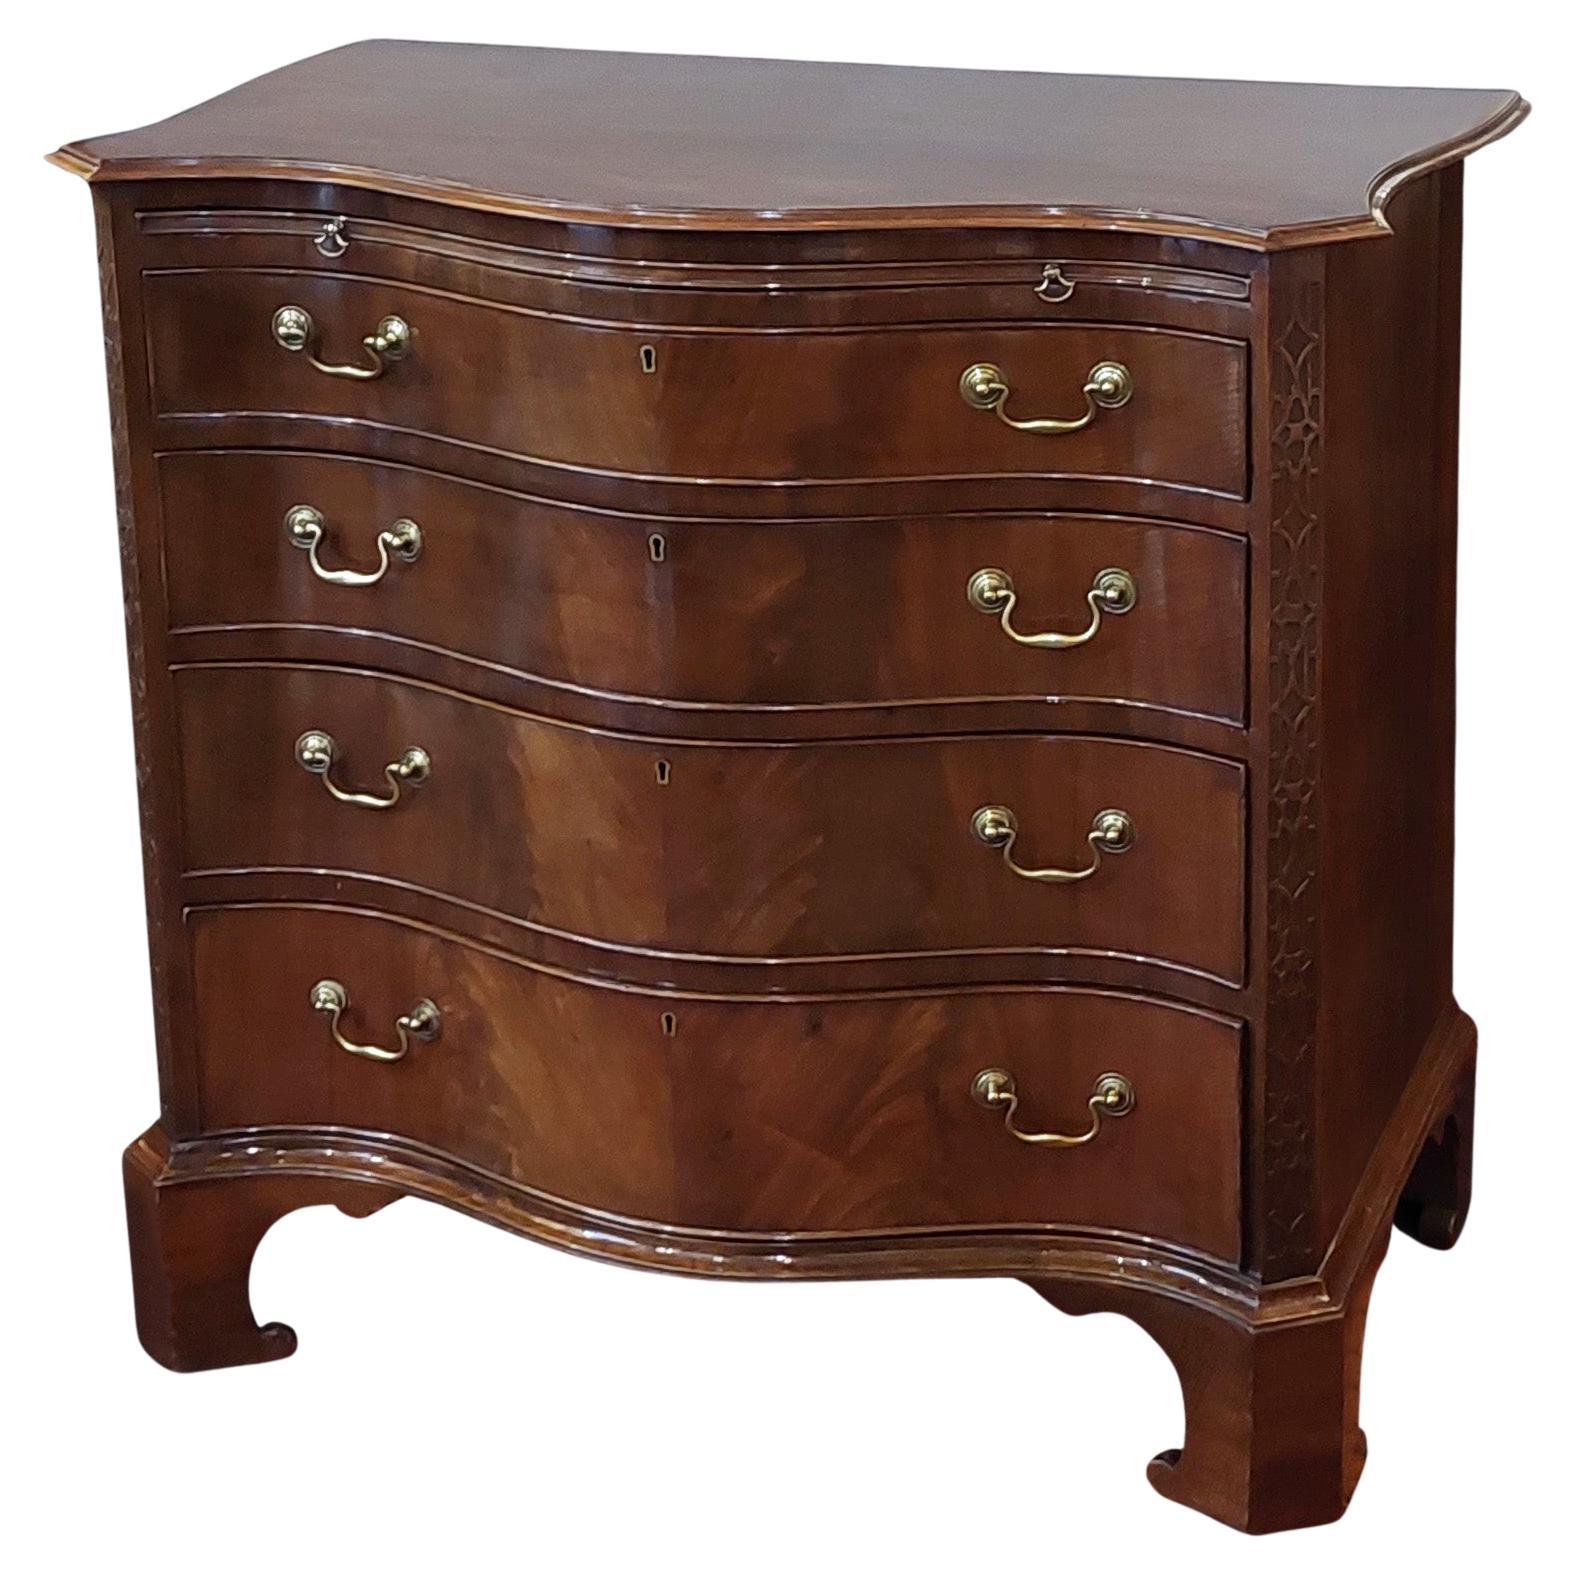 Victorian Chippendale Revival Serpentine Mahogany Chest of Drawers